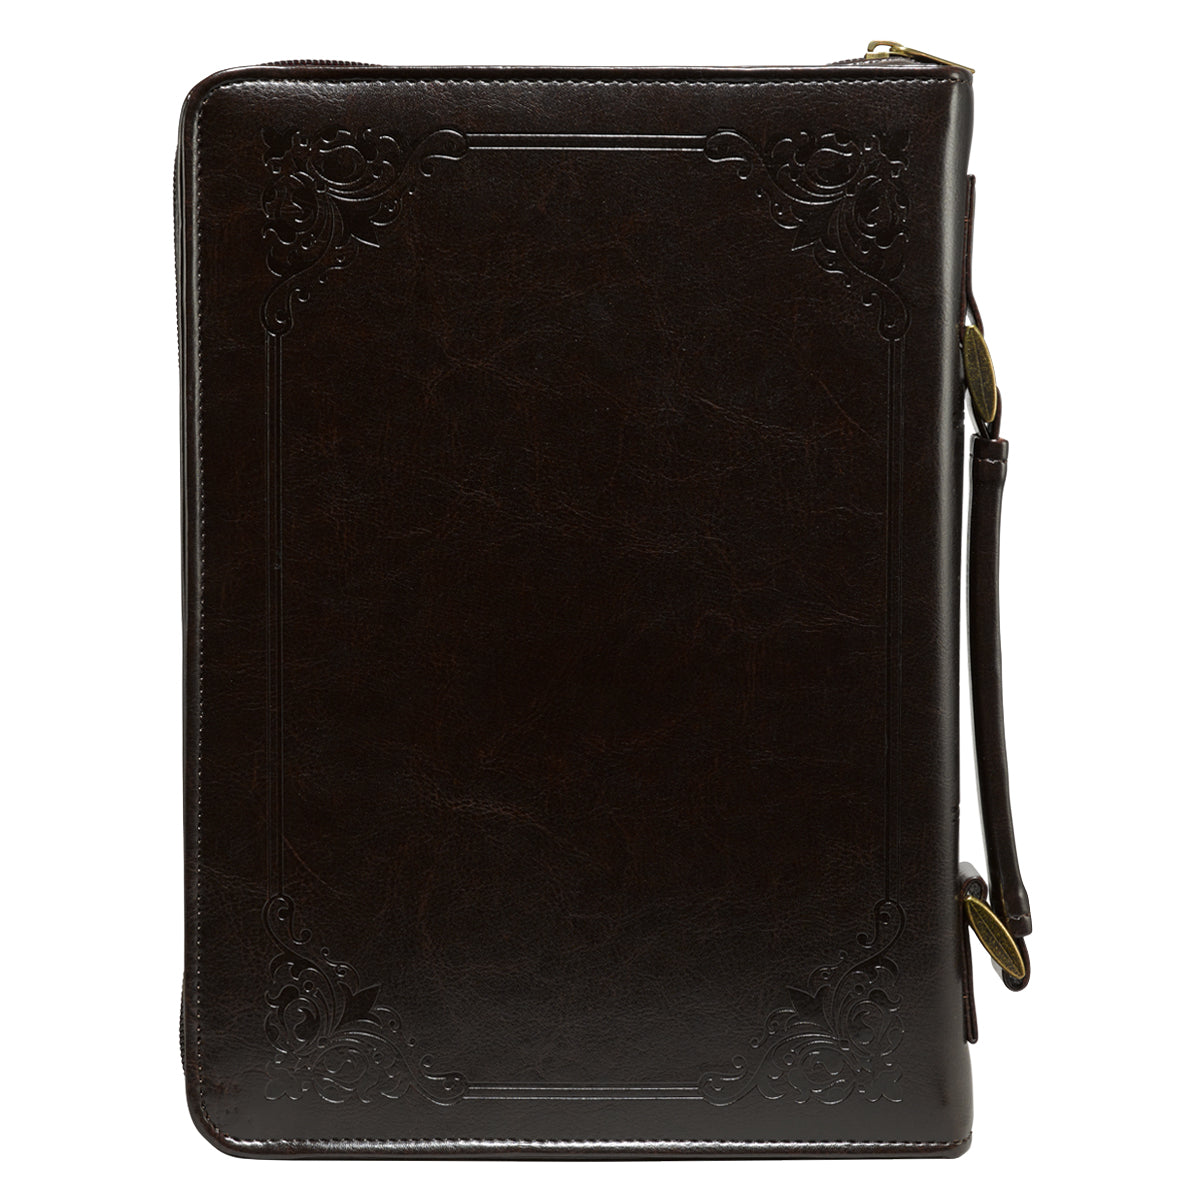 The Holy Bible Dark Brown Faux Leather Classic Bible Cover - The Christian Gift Company